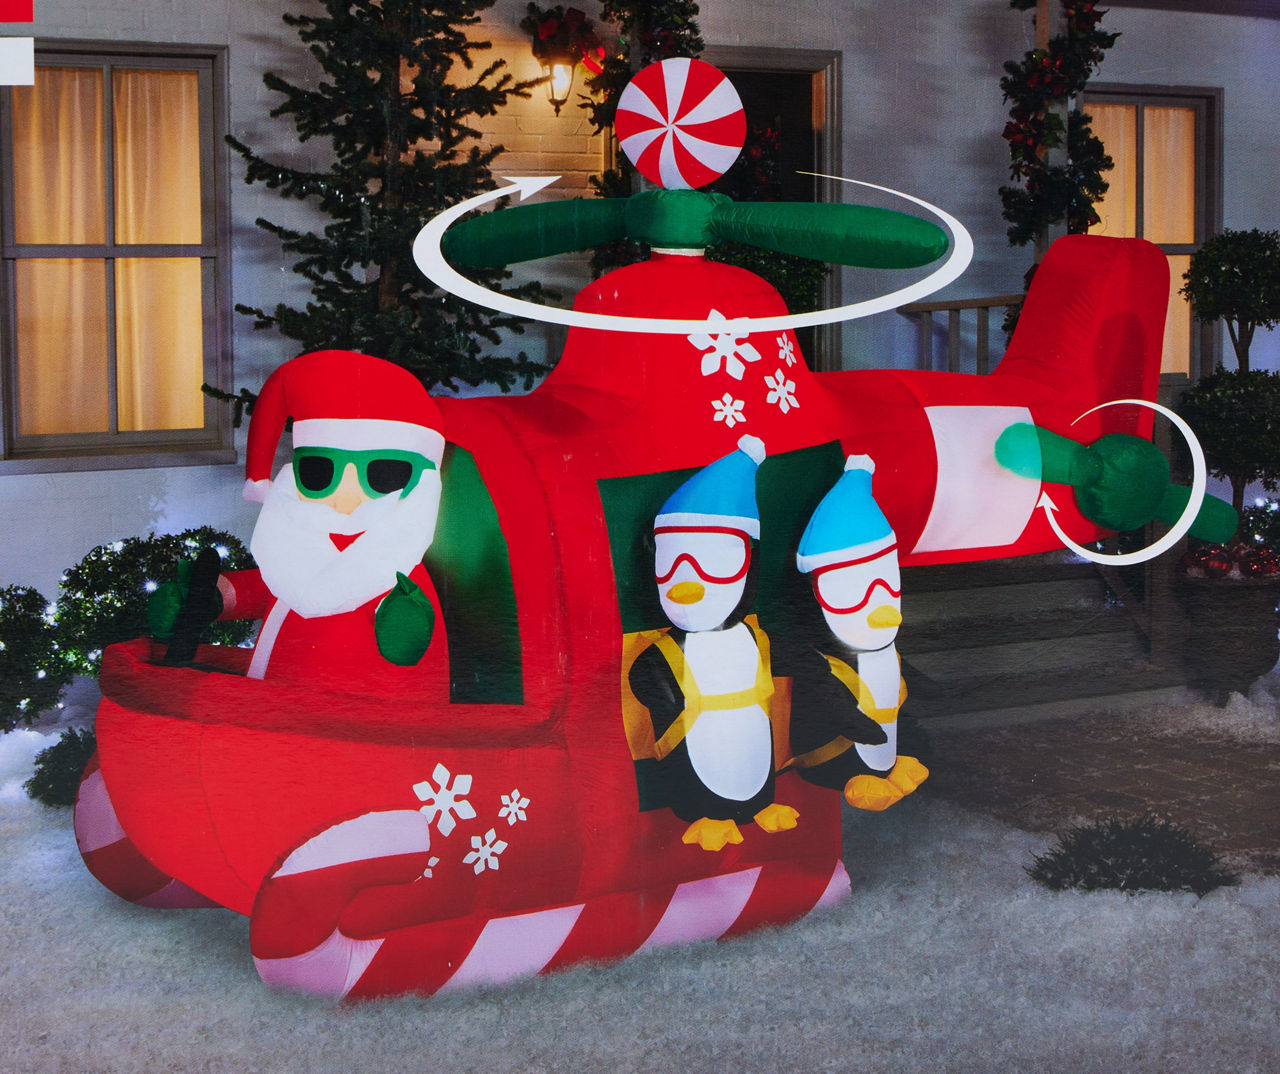 Airblown 8.5' Inflatable LED Christmas Helicopter Scene | Big Lots